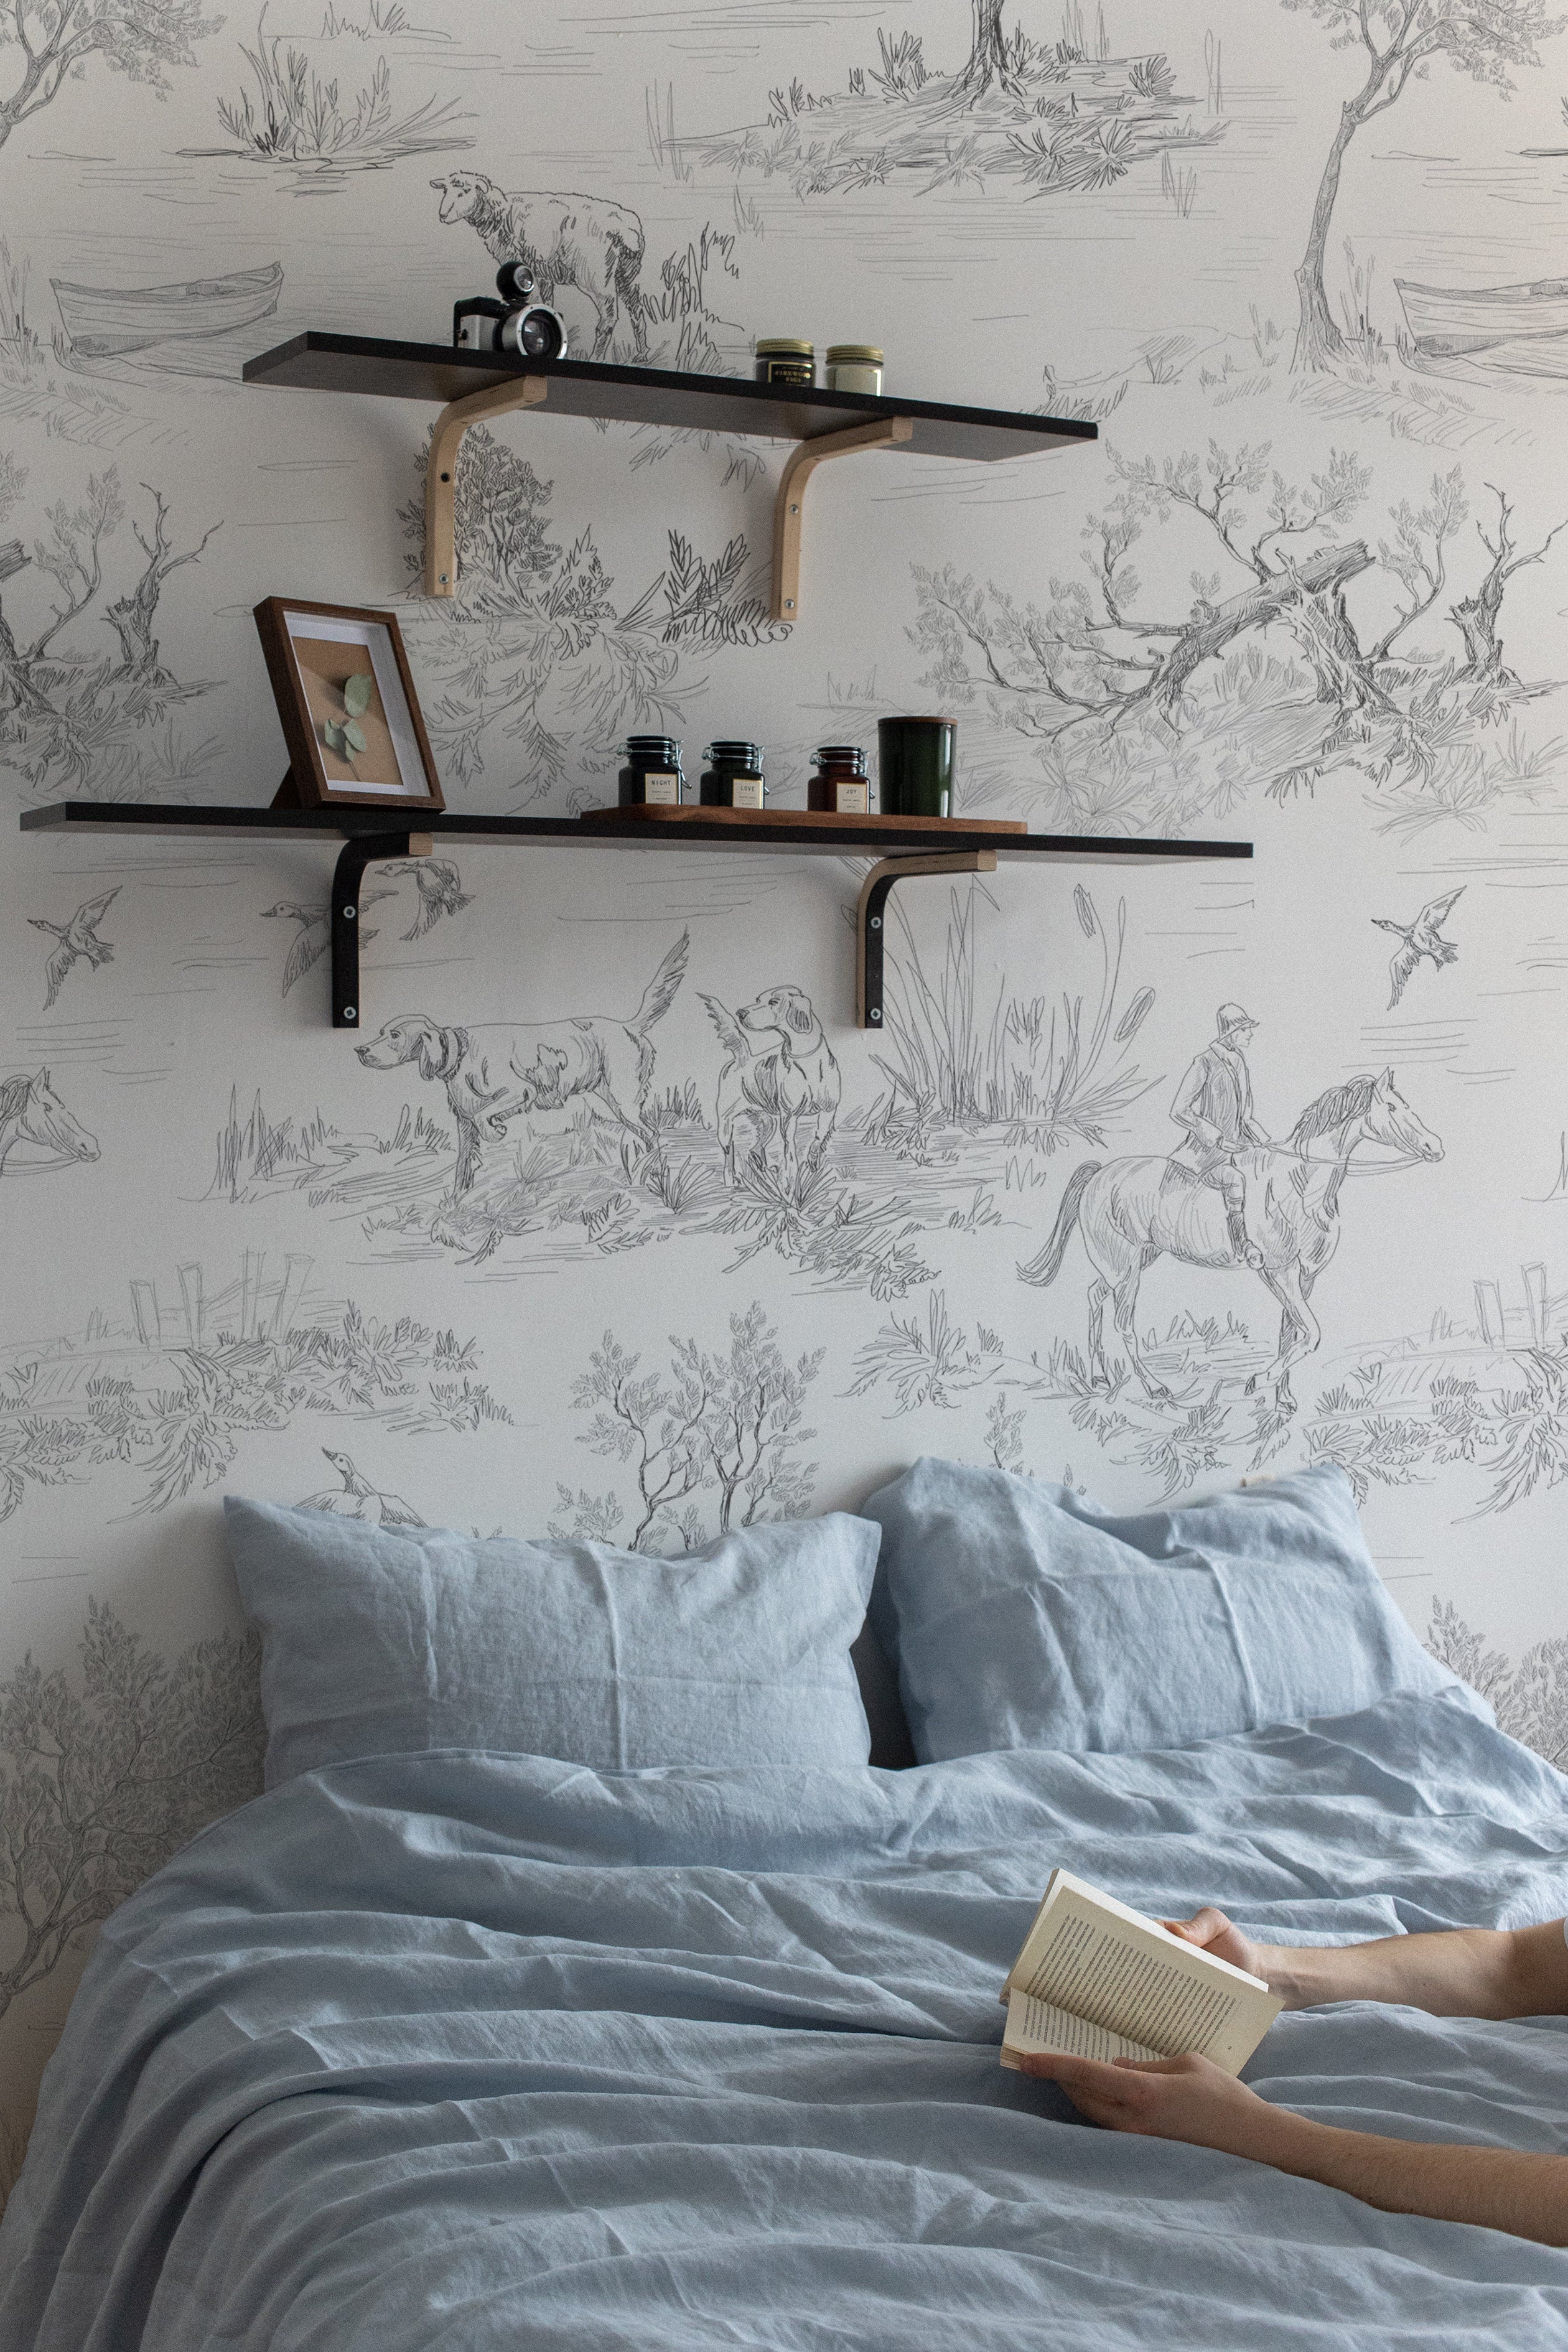 A cozy bedroom setting with Outdoor Friend Sketch Wallpaper. The wall behind the bed is adorned with intricate sketches depicting outdoor scenes with animals and hunters, providing a tranquil and artistic backdrop to the simple blue bedding and person reading a book.